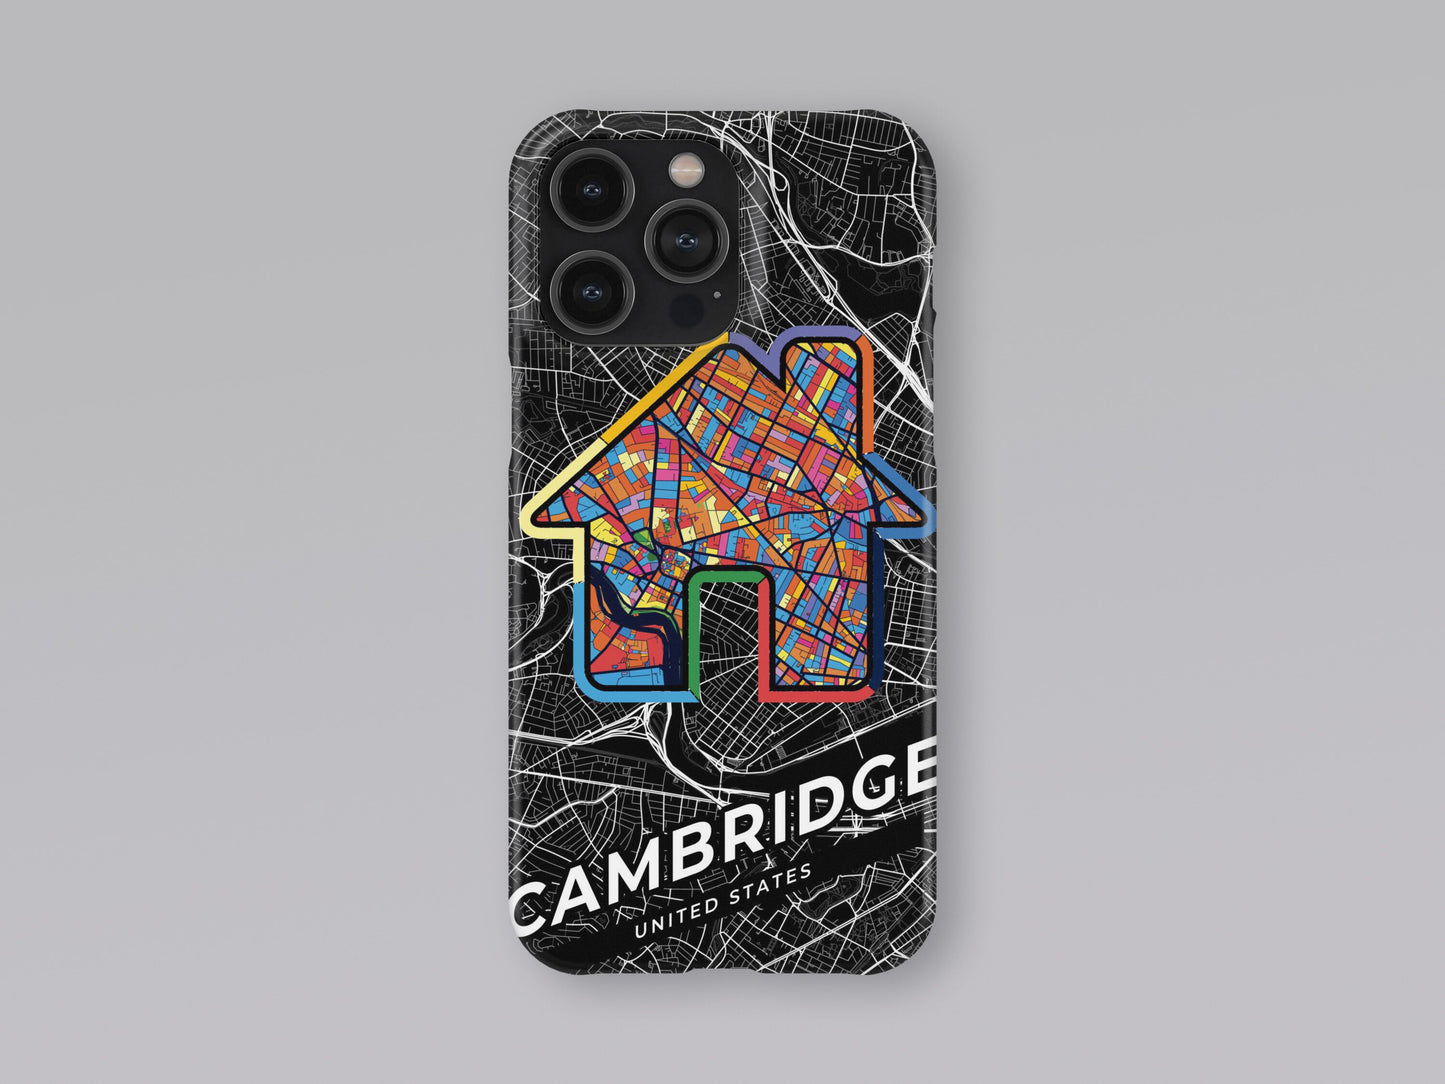 Cambridge Massachusetts slim phone case with colorful icon. Birthday, wedding or housewarming gift. Couple match cases. 3